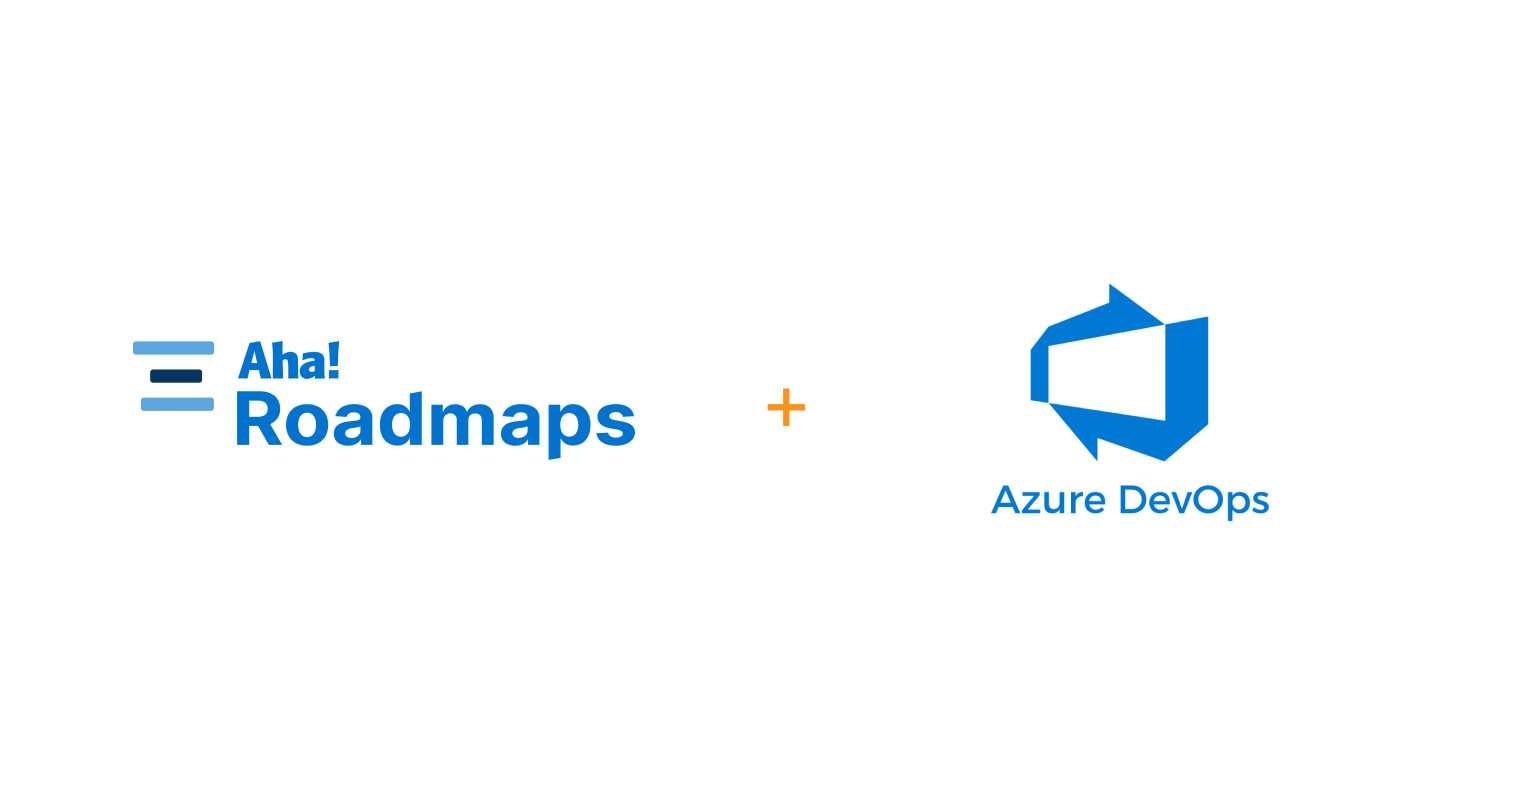 Hero image for the go-to-market launch of dependency syncing between Aha! Roadmaps and Azure DevOps